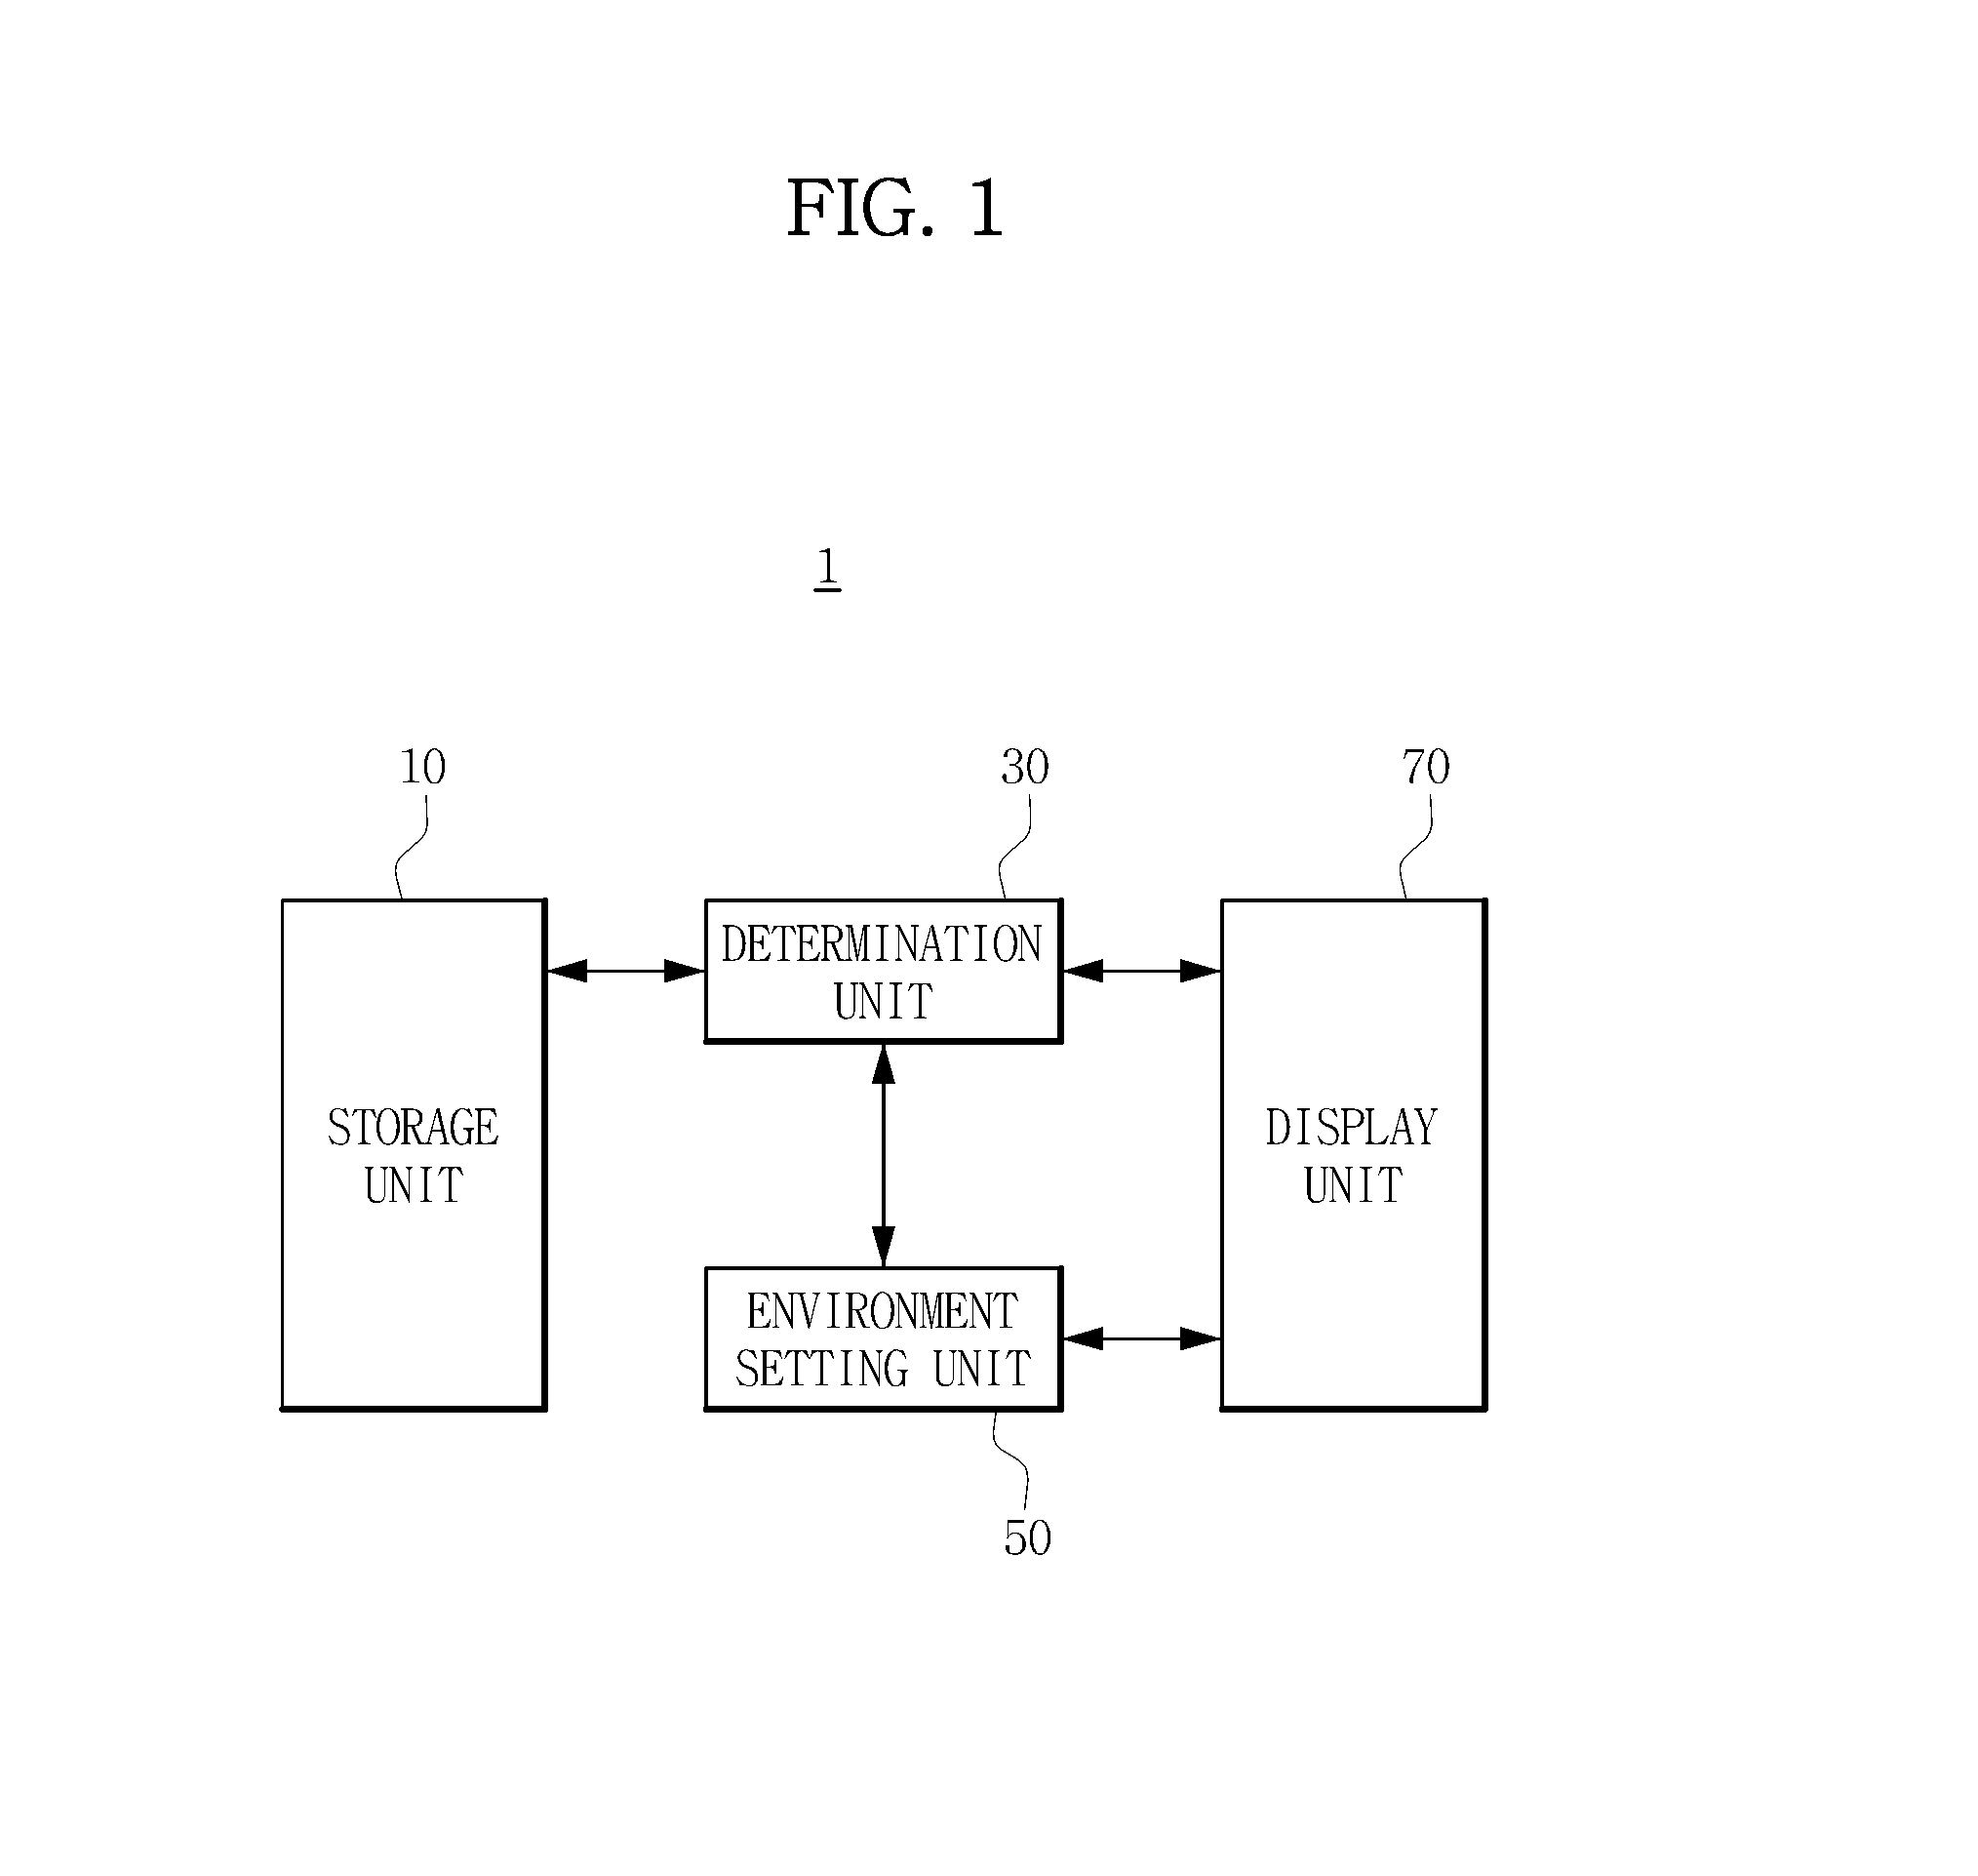 Terminal and method for displaying operability of an application